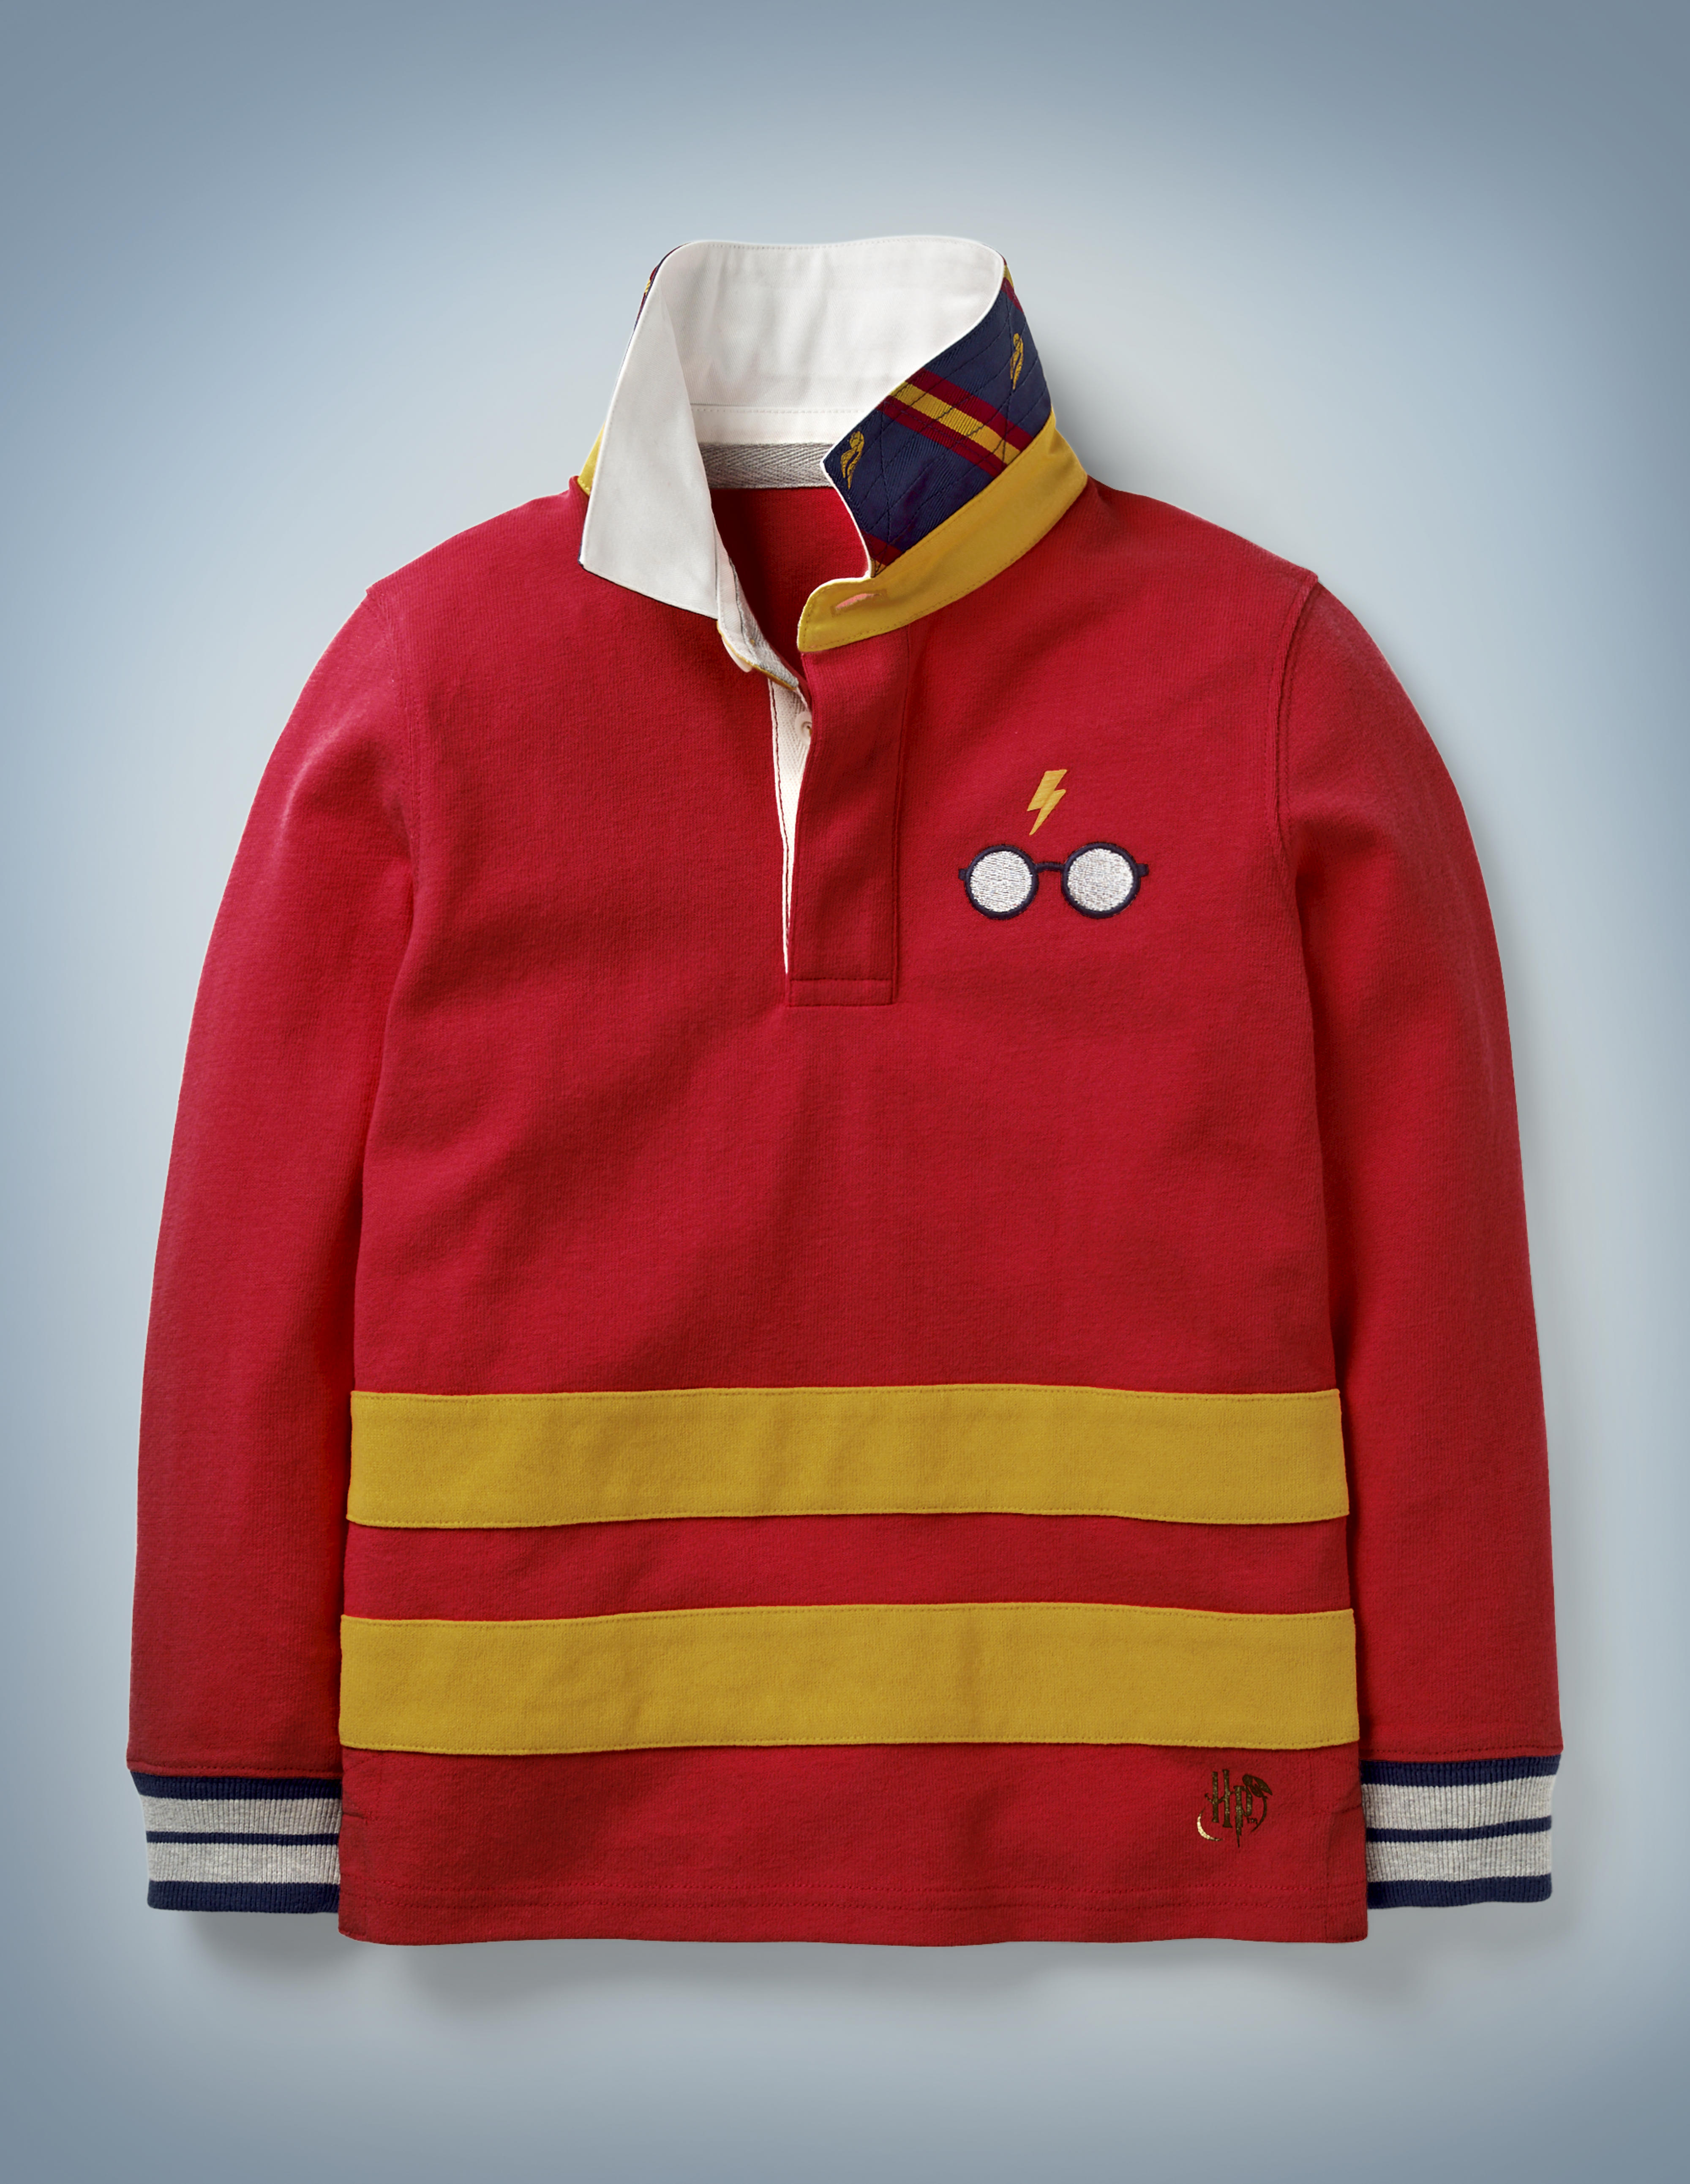 The Mini Boden Hogwarts Rugby Shirt in red is collared with cuffs and features horizontal gold stripes near the hem and a Harry Potter glasses-and-scar design in the front pocket area. It retails at £30.